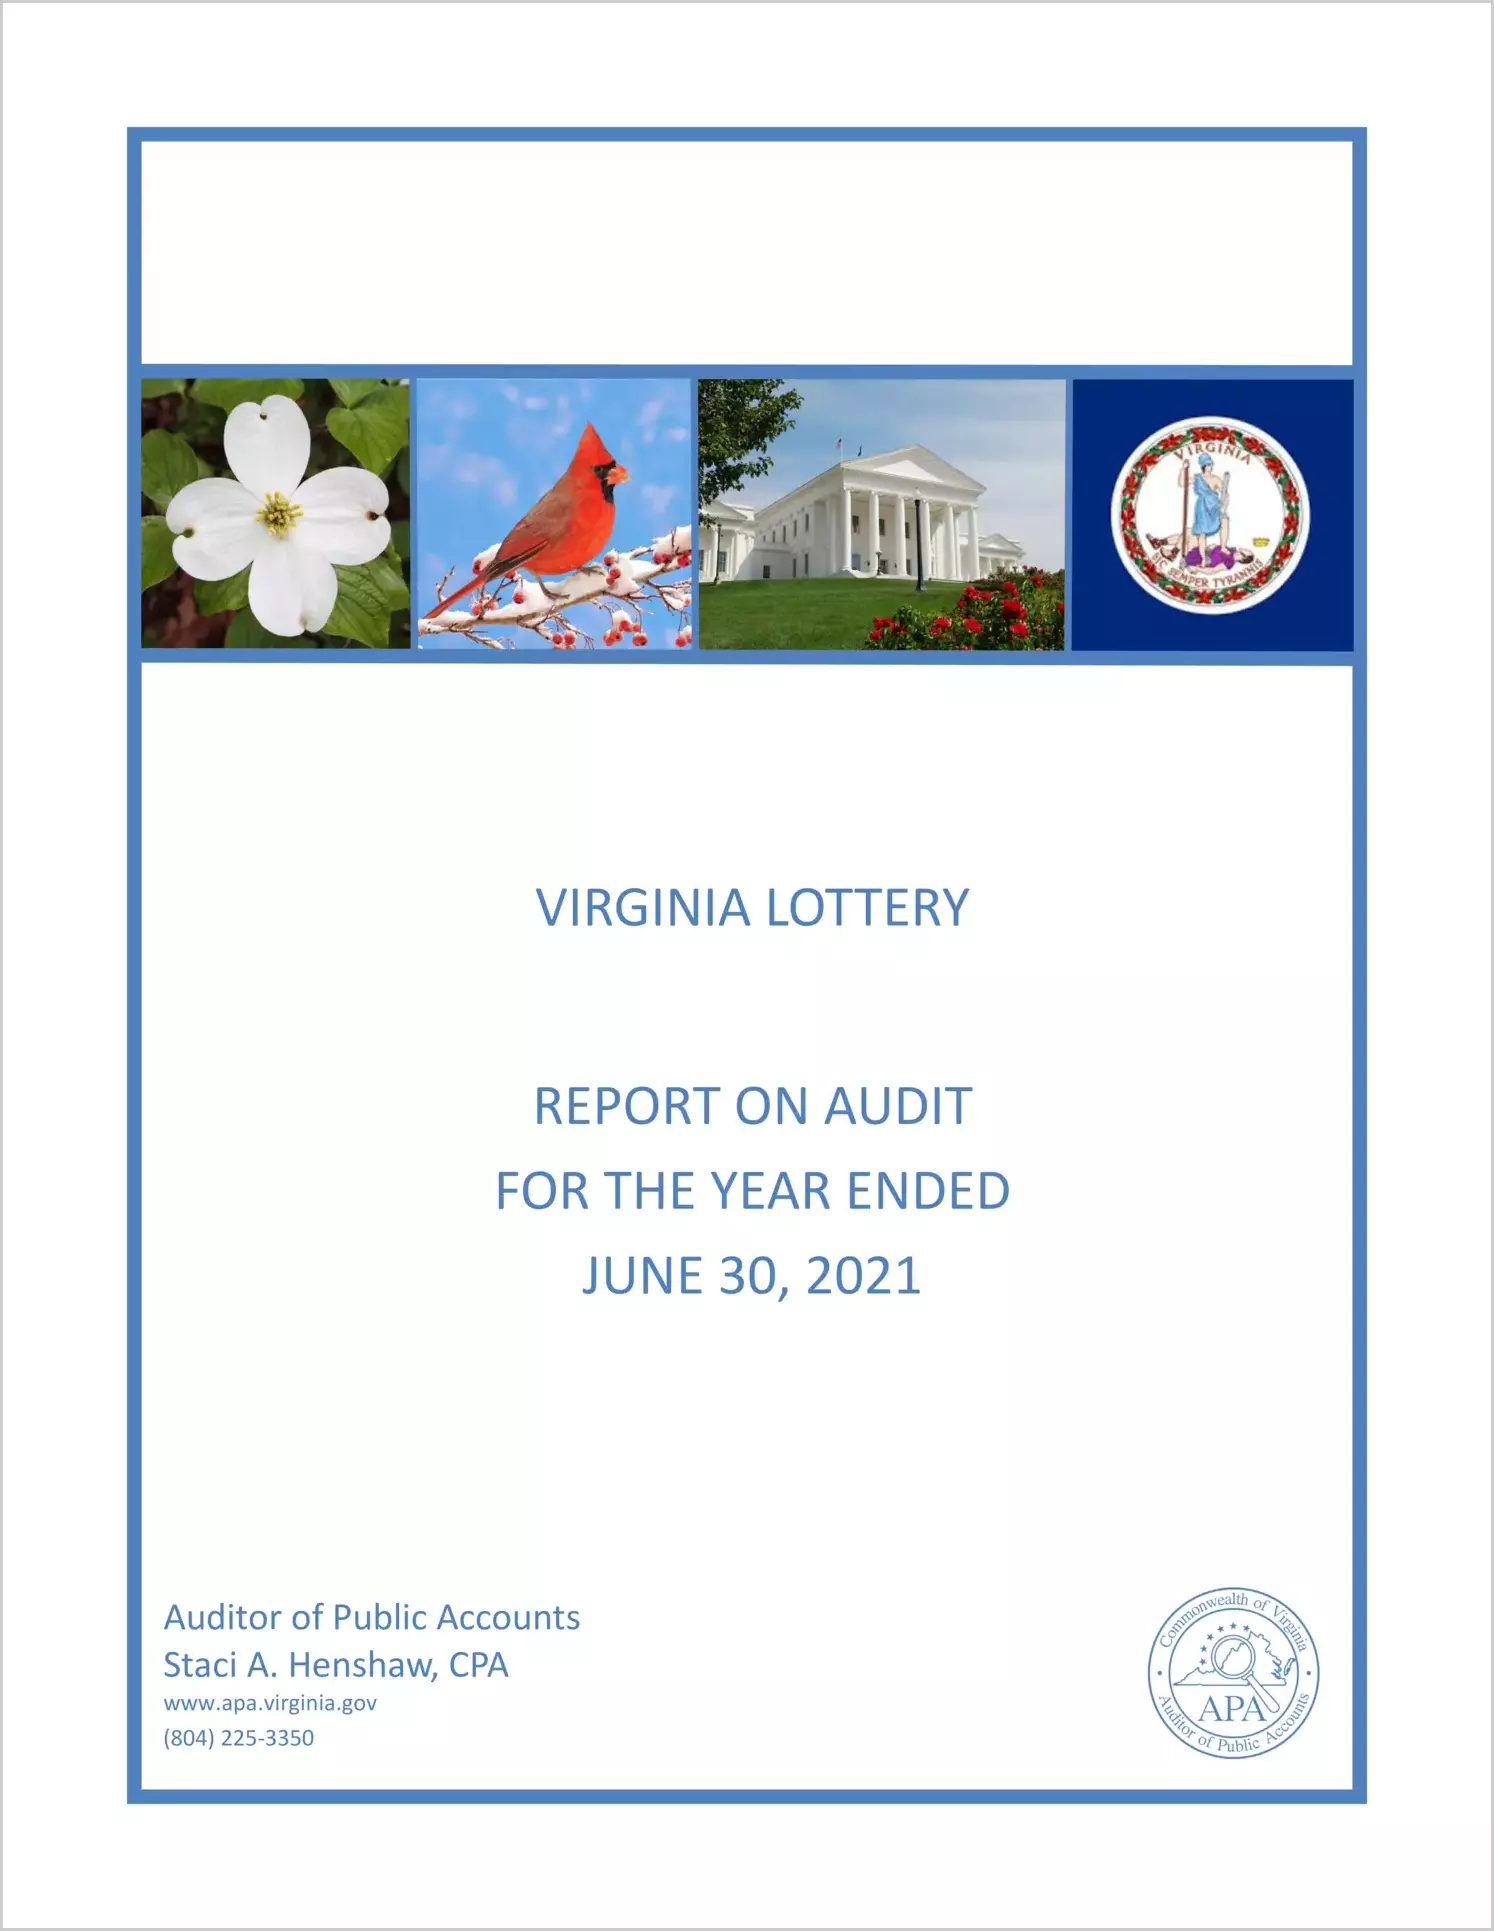 Virginia Lottery for the year ended June 30, 2021